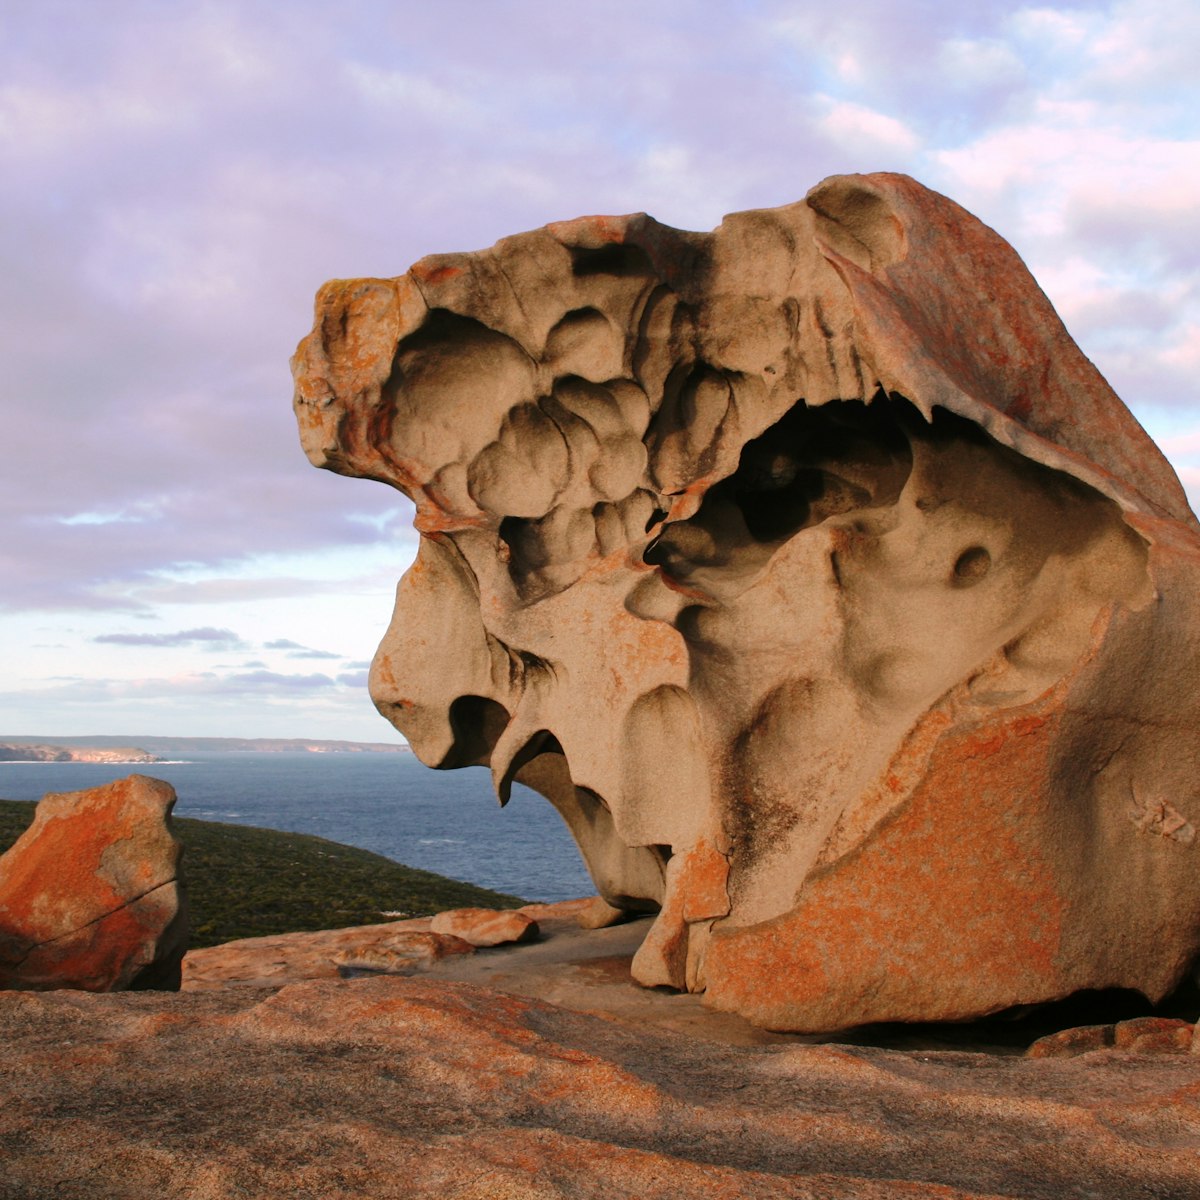 "Located in Flinders Chase National Park, the impressive Remarkable Rocks are a cluster of precariously balanced granite boulders which have been shaped by the erosive forces of wind, sea spray and rain over some 500 million years."
178488085
"Stone, Flinder's Chase National Park, Textured, Grooved, Remarkable Rocks, Balanced Rock, Geology, Scenics, Nature, Kangaroo Island, South Australia, Australia, Boulder, Rock, Granite, Stack Rock, Rock Formation, National Park, Sea, Eroded, Nature, Travel Locations, Landscapes, Landmarks, Geological Feature, Flinders Chase National Park"